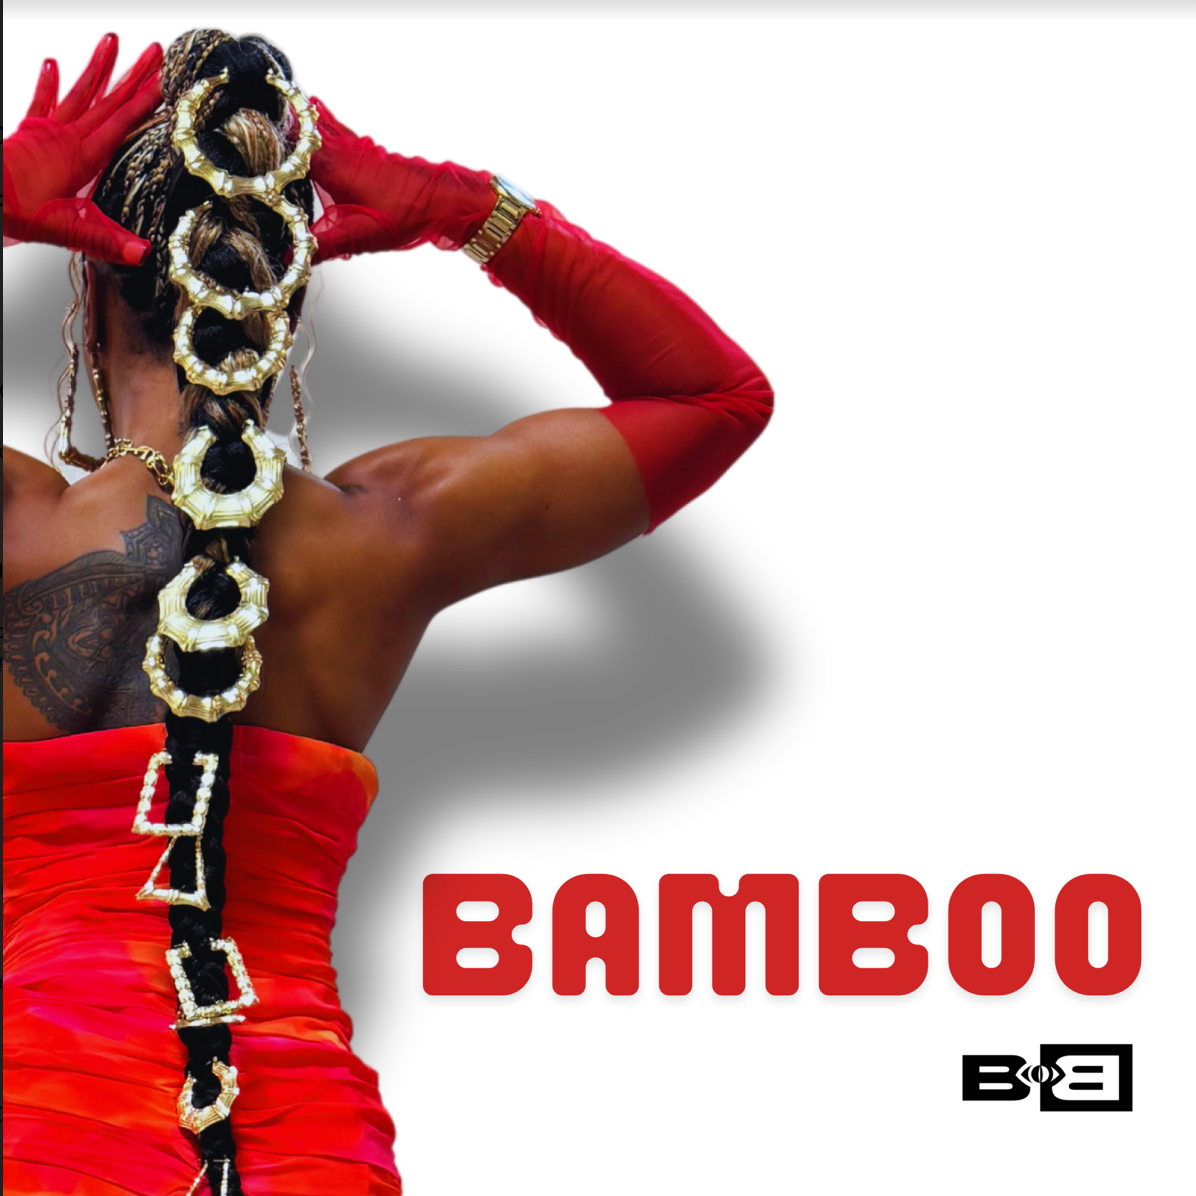 B.o.B Releases New Single "Bamboo" from Upcoming Project 'Space Time'